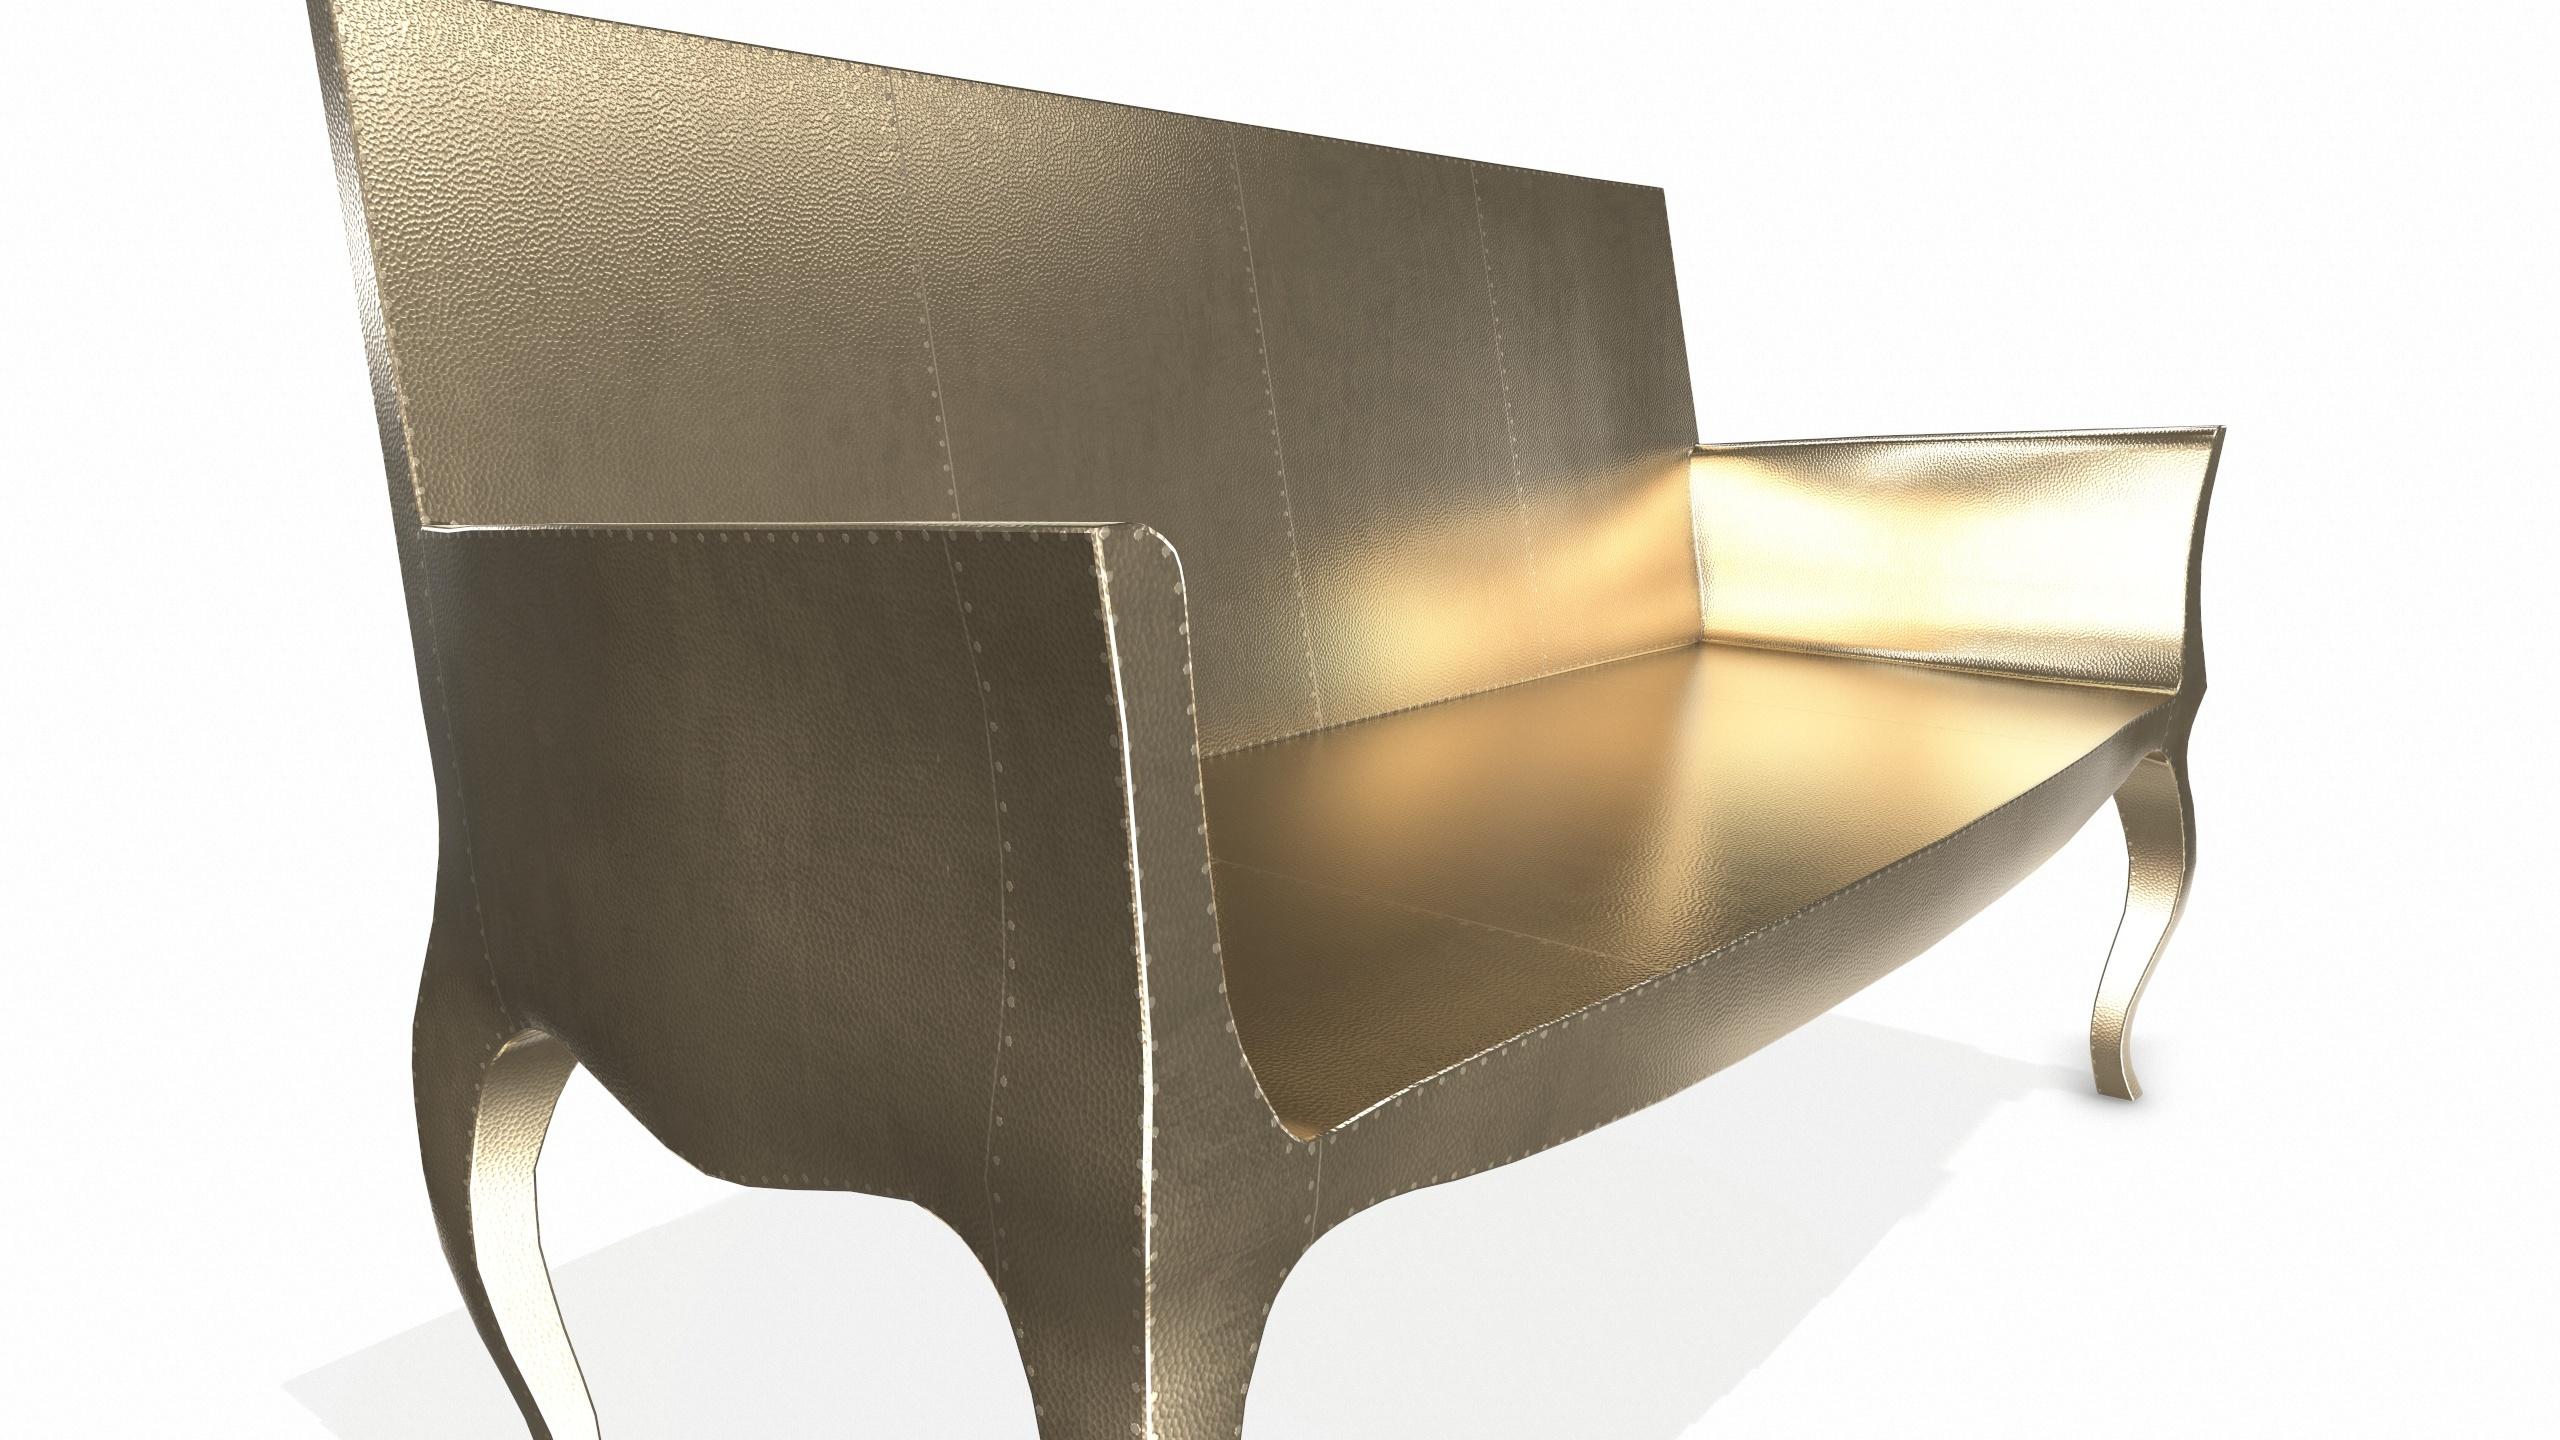 Metal Louise Settee Art Deco Benches in Mid. Hammered Brass by Paul Mathieu For Sale